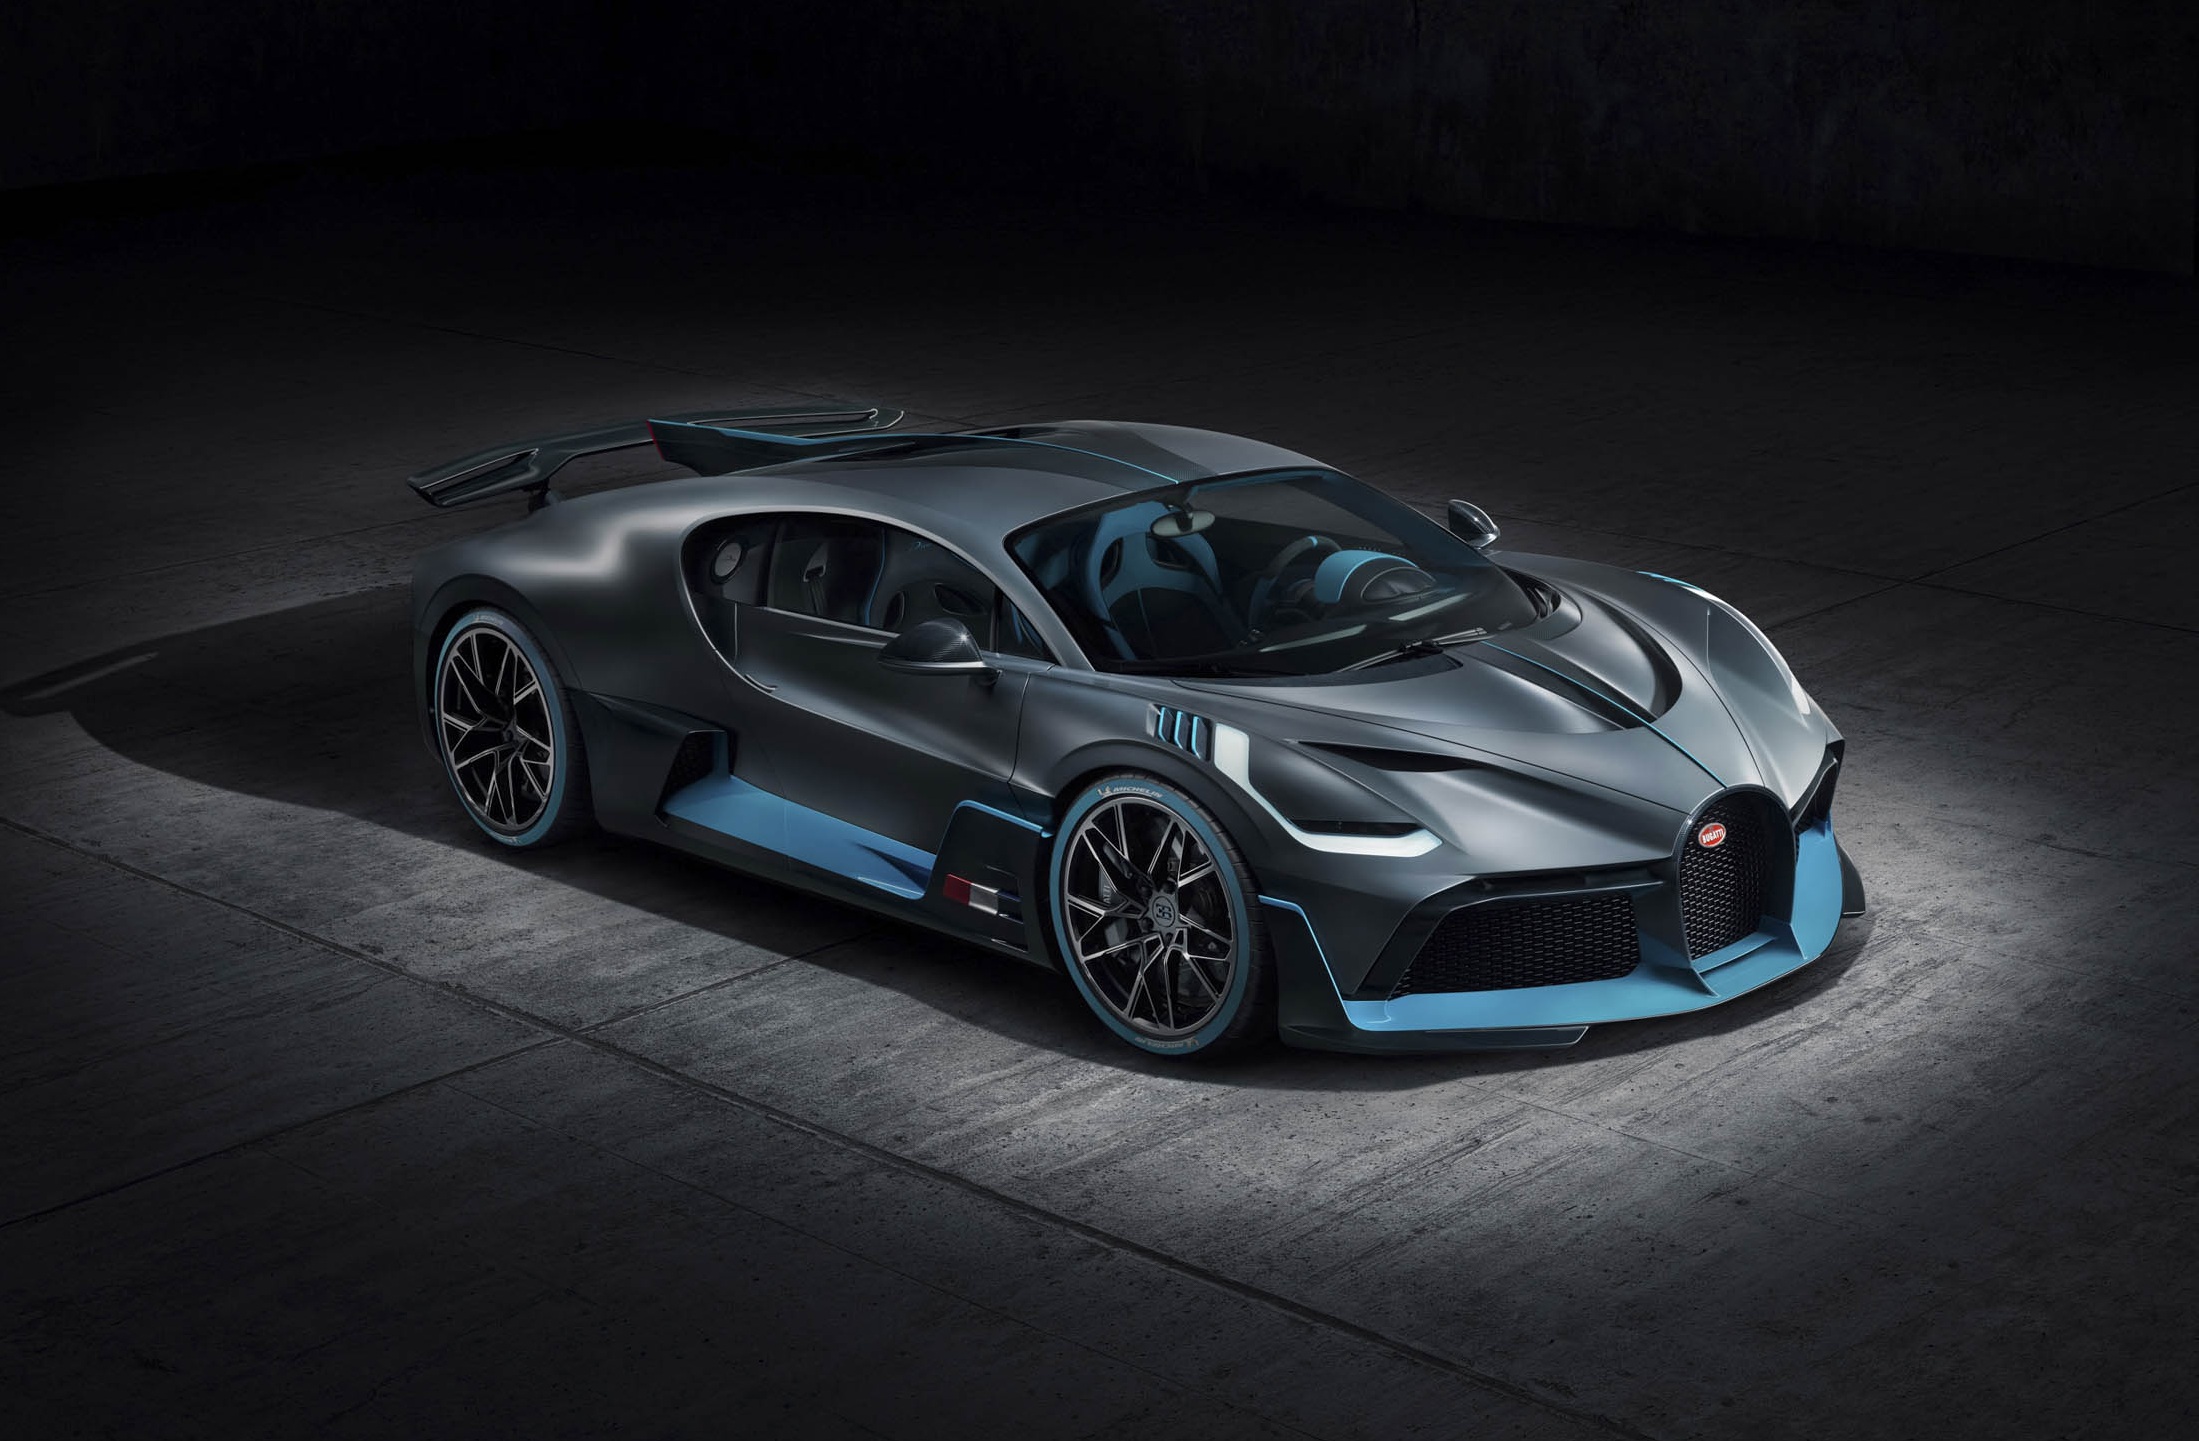 For $5.8m, Bugatti’s new supercar will turn corners faster than ever ...